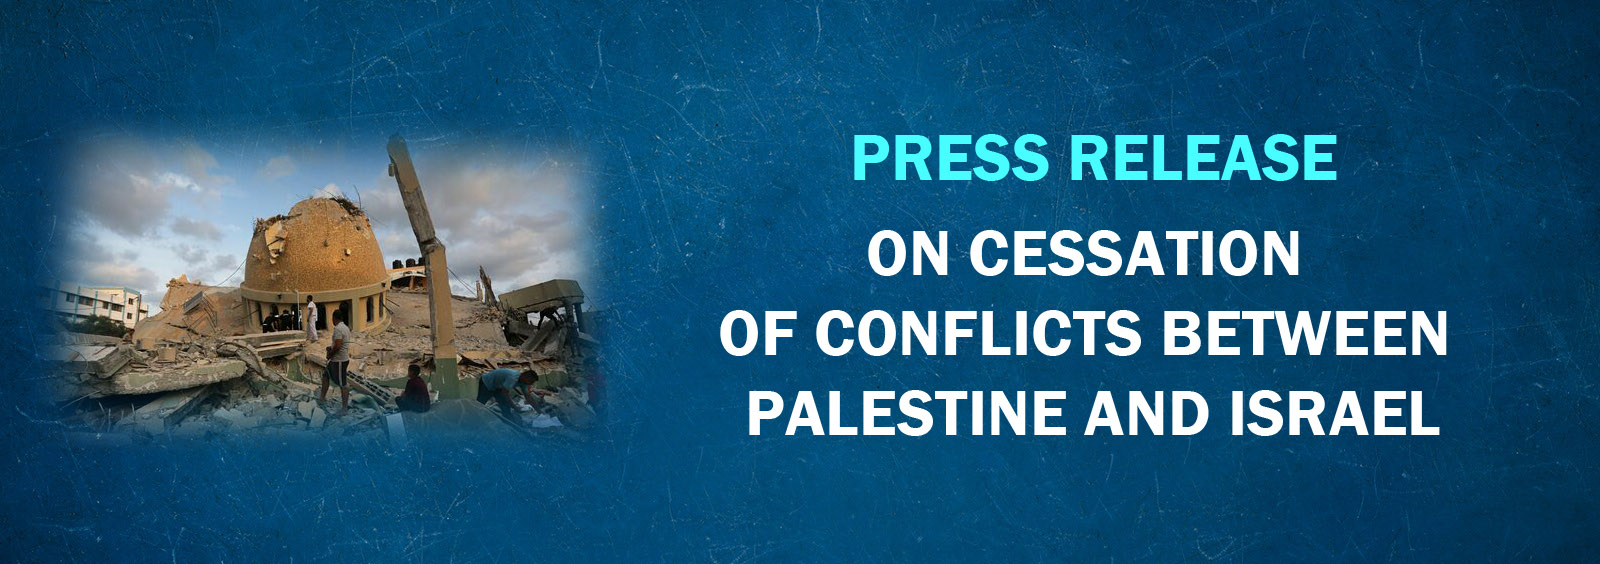 Press Release on Cessation of Conflicts Between Palestine and Israel